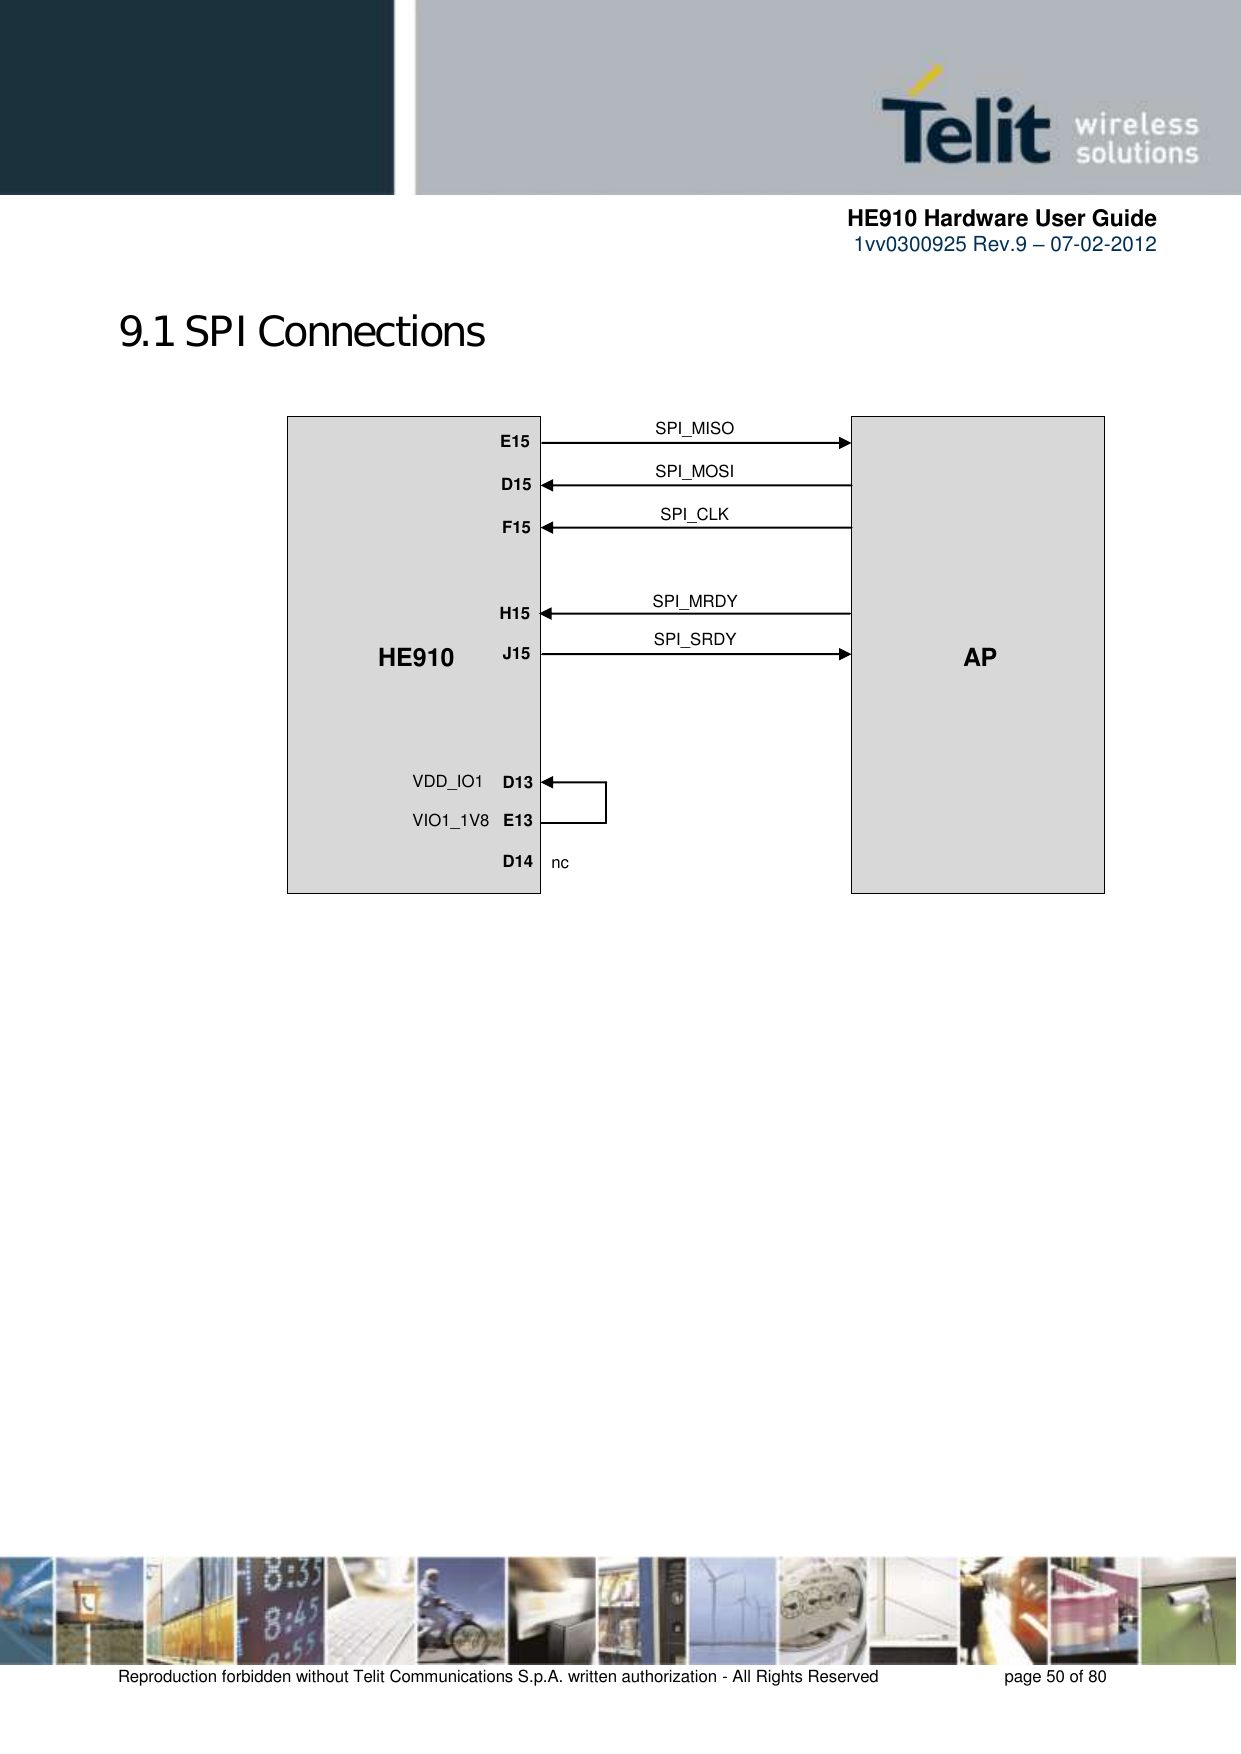      HE910 Hardware User Guide 1vv0300925 Rev.9 – 07-02-2012    Reproduction forbidden without Telit Communications S.p.A. written authorization - All Rights Reserved    page 50 of 80  9.1 SPI Connections                    SPI_MISO E15 D15 F15  H15 J15   D13 E13 D14 HE910            AP SPI_MOSI SPI_CLK SPI_MRDY SPI_SRDY VDD_IO1 VIO1_1V8  nc  